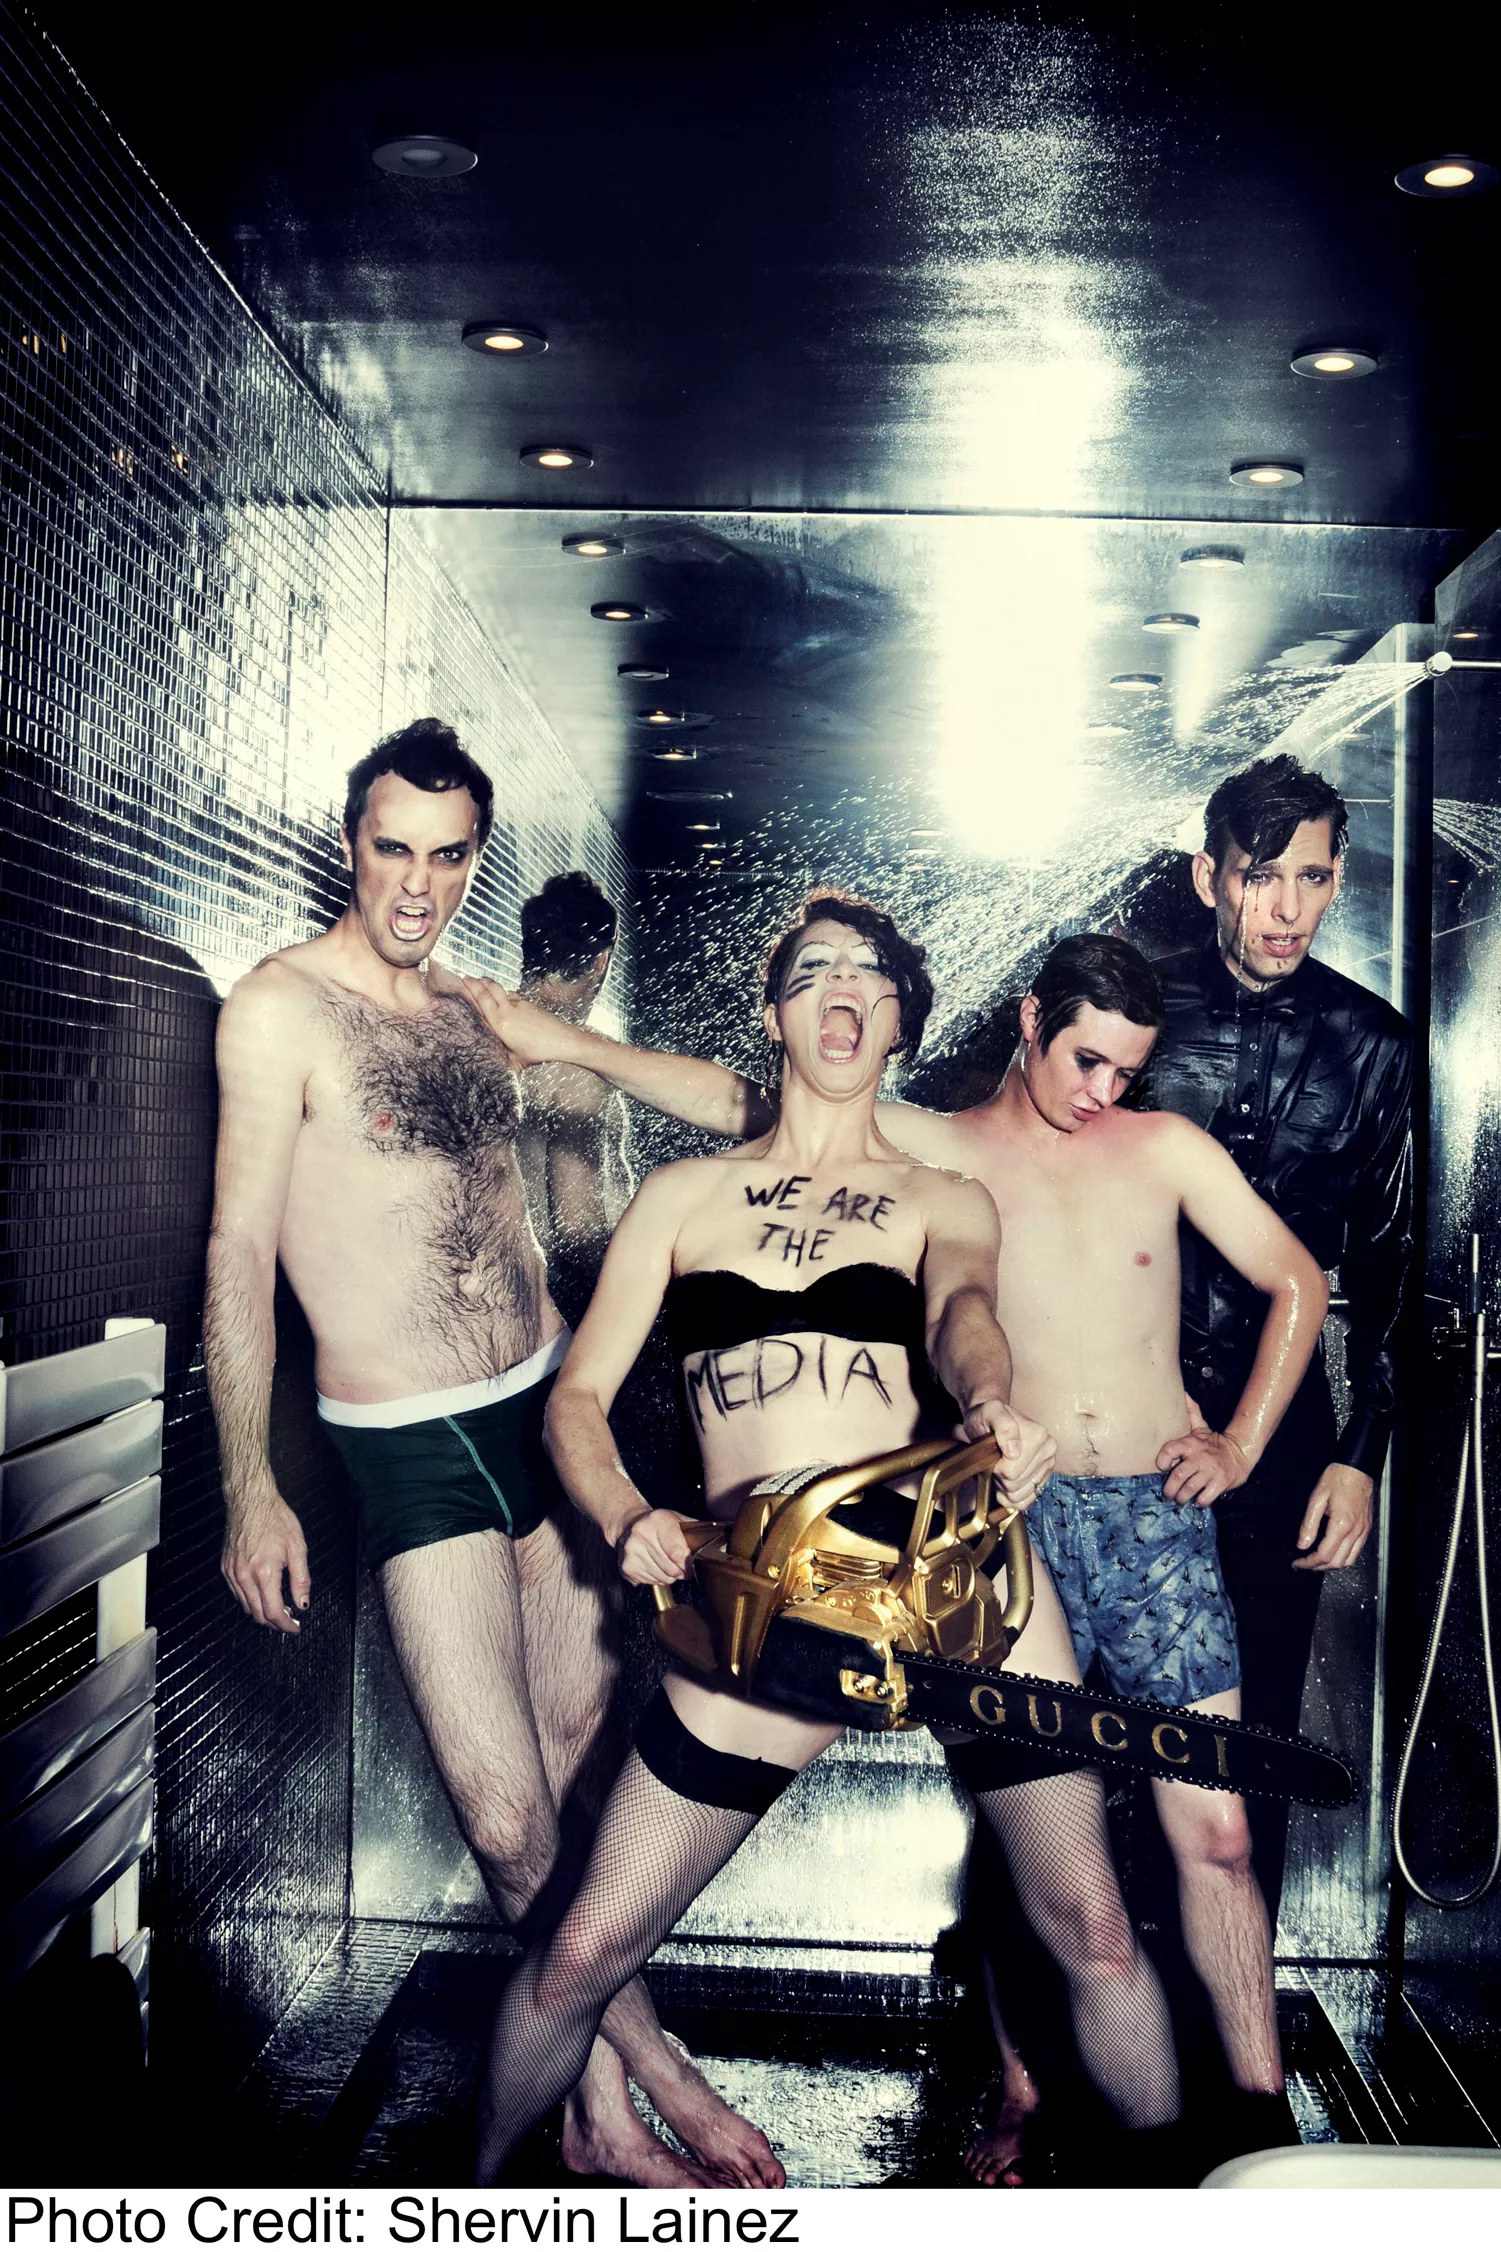 Amanda Palmer and The Grand Theft Orchestra: C-Club, Berlin